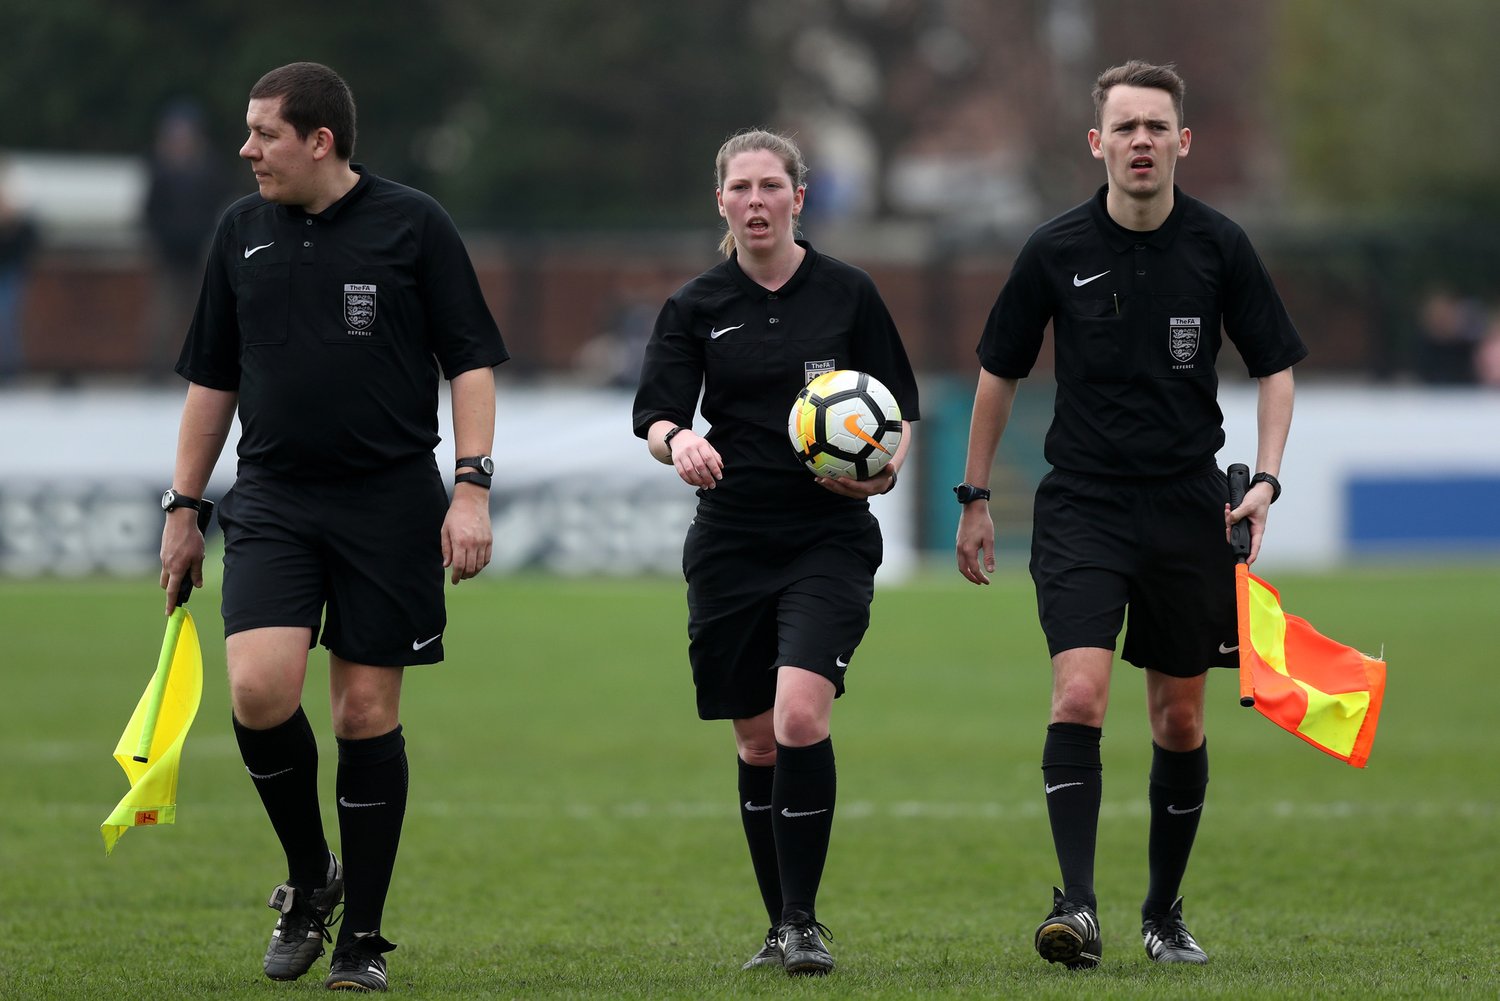 The Role of Referee Associations: Building a Supportive Refereeing ...